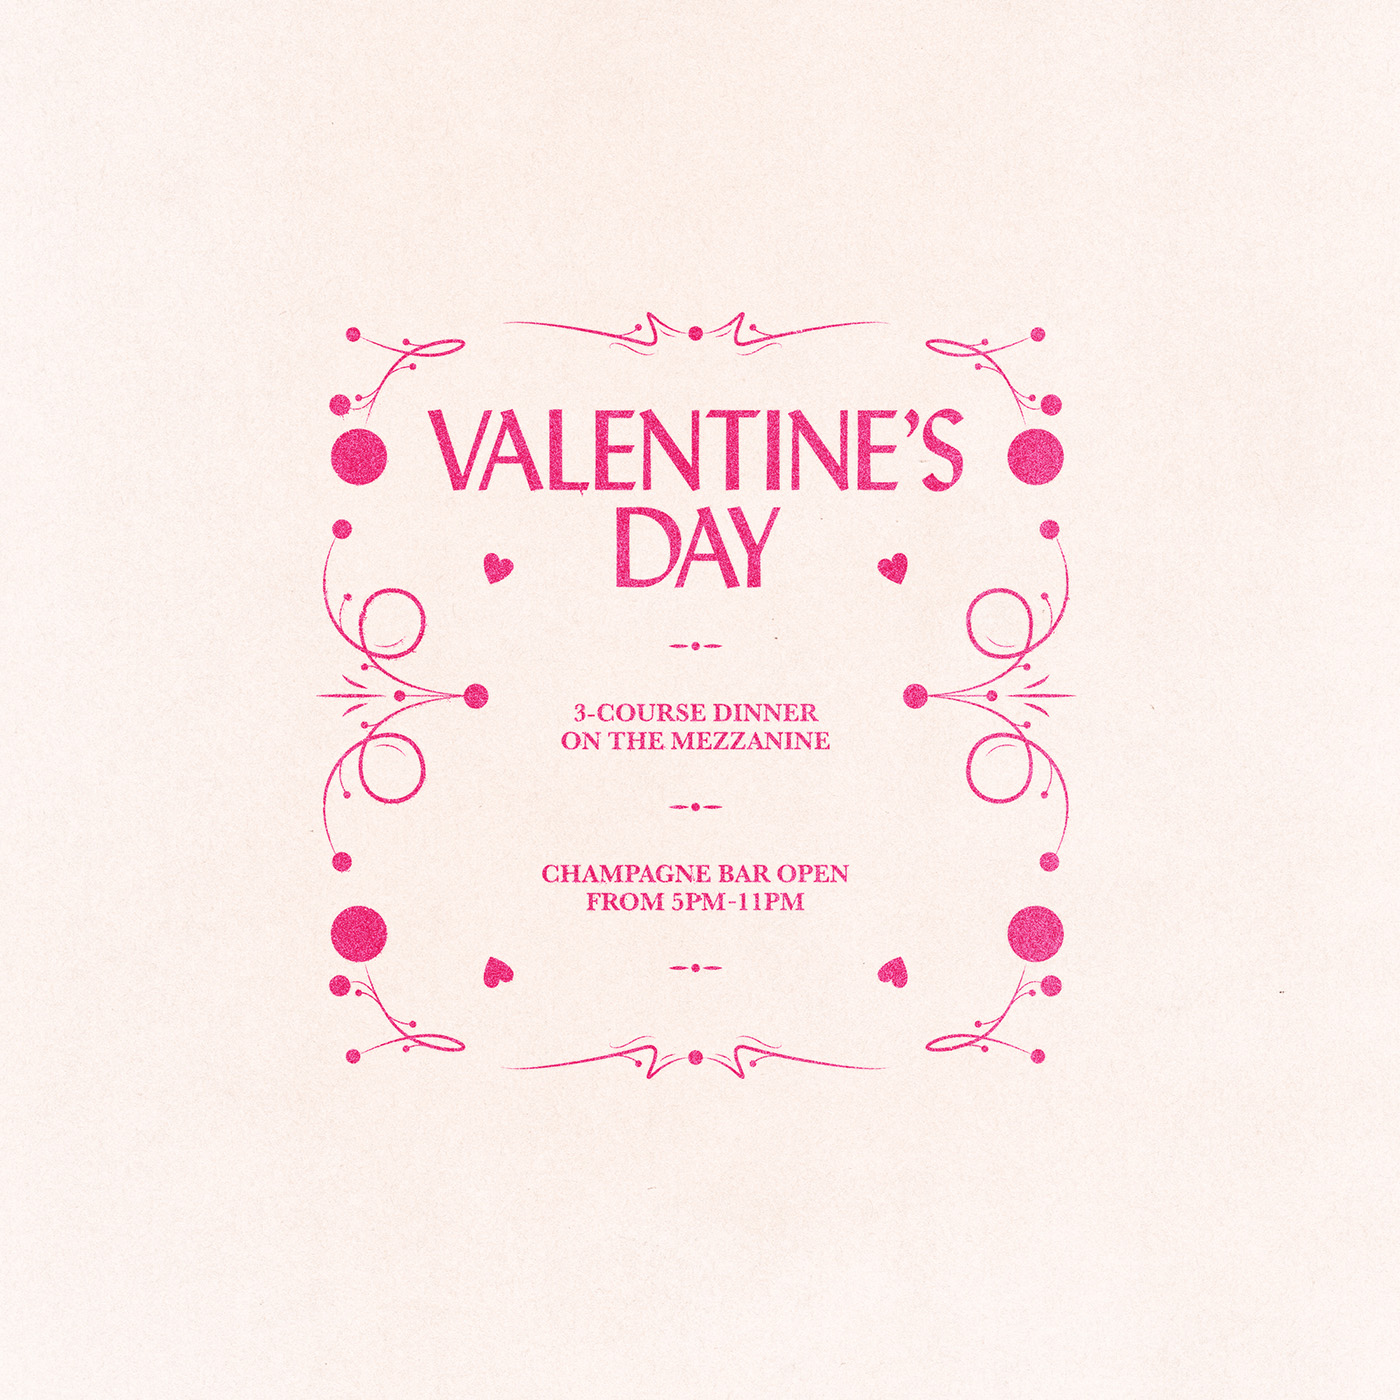 A pink flyer for the LINE DC's Valentine's Day dinner.